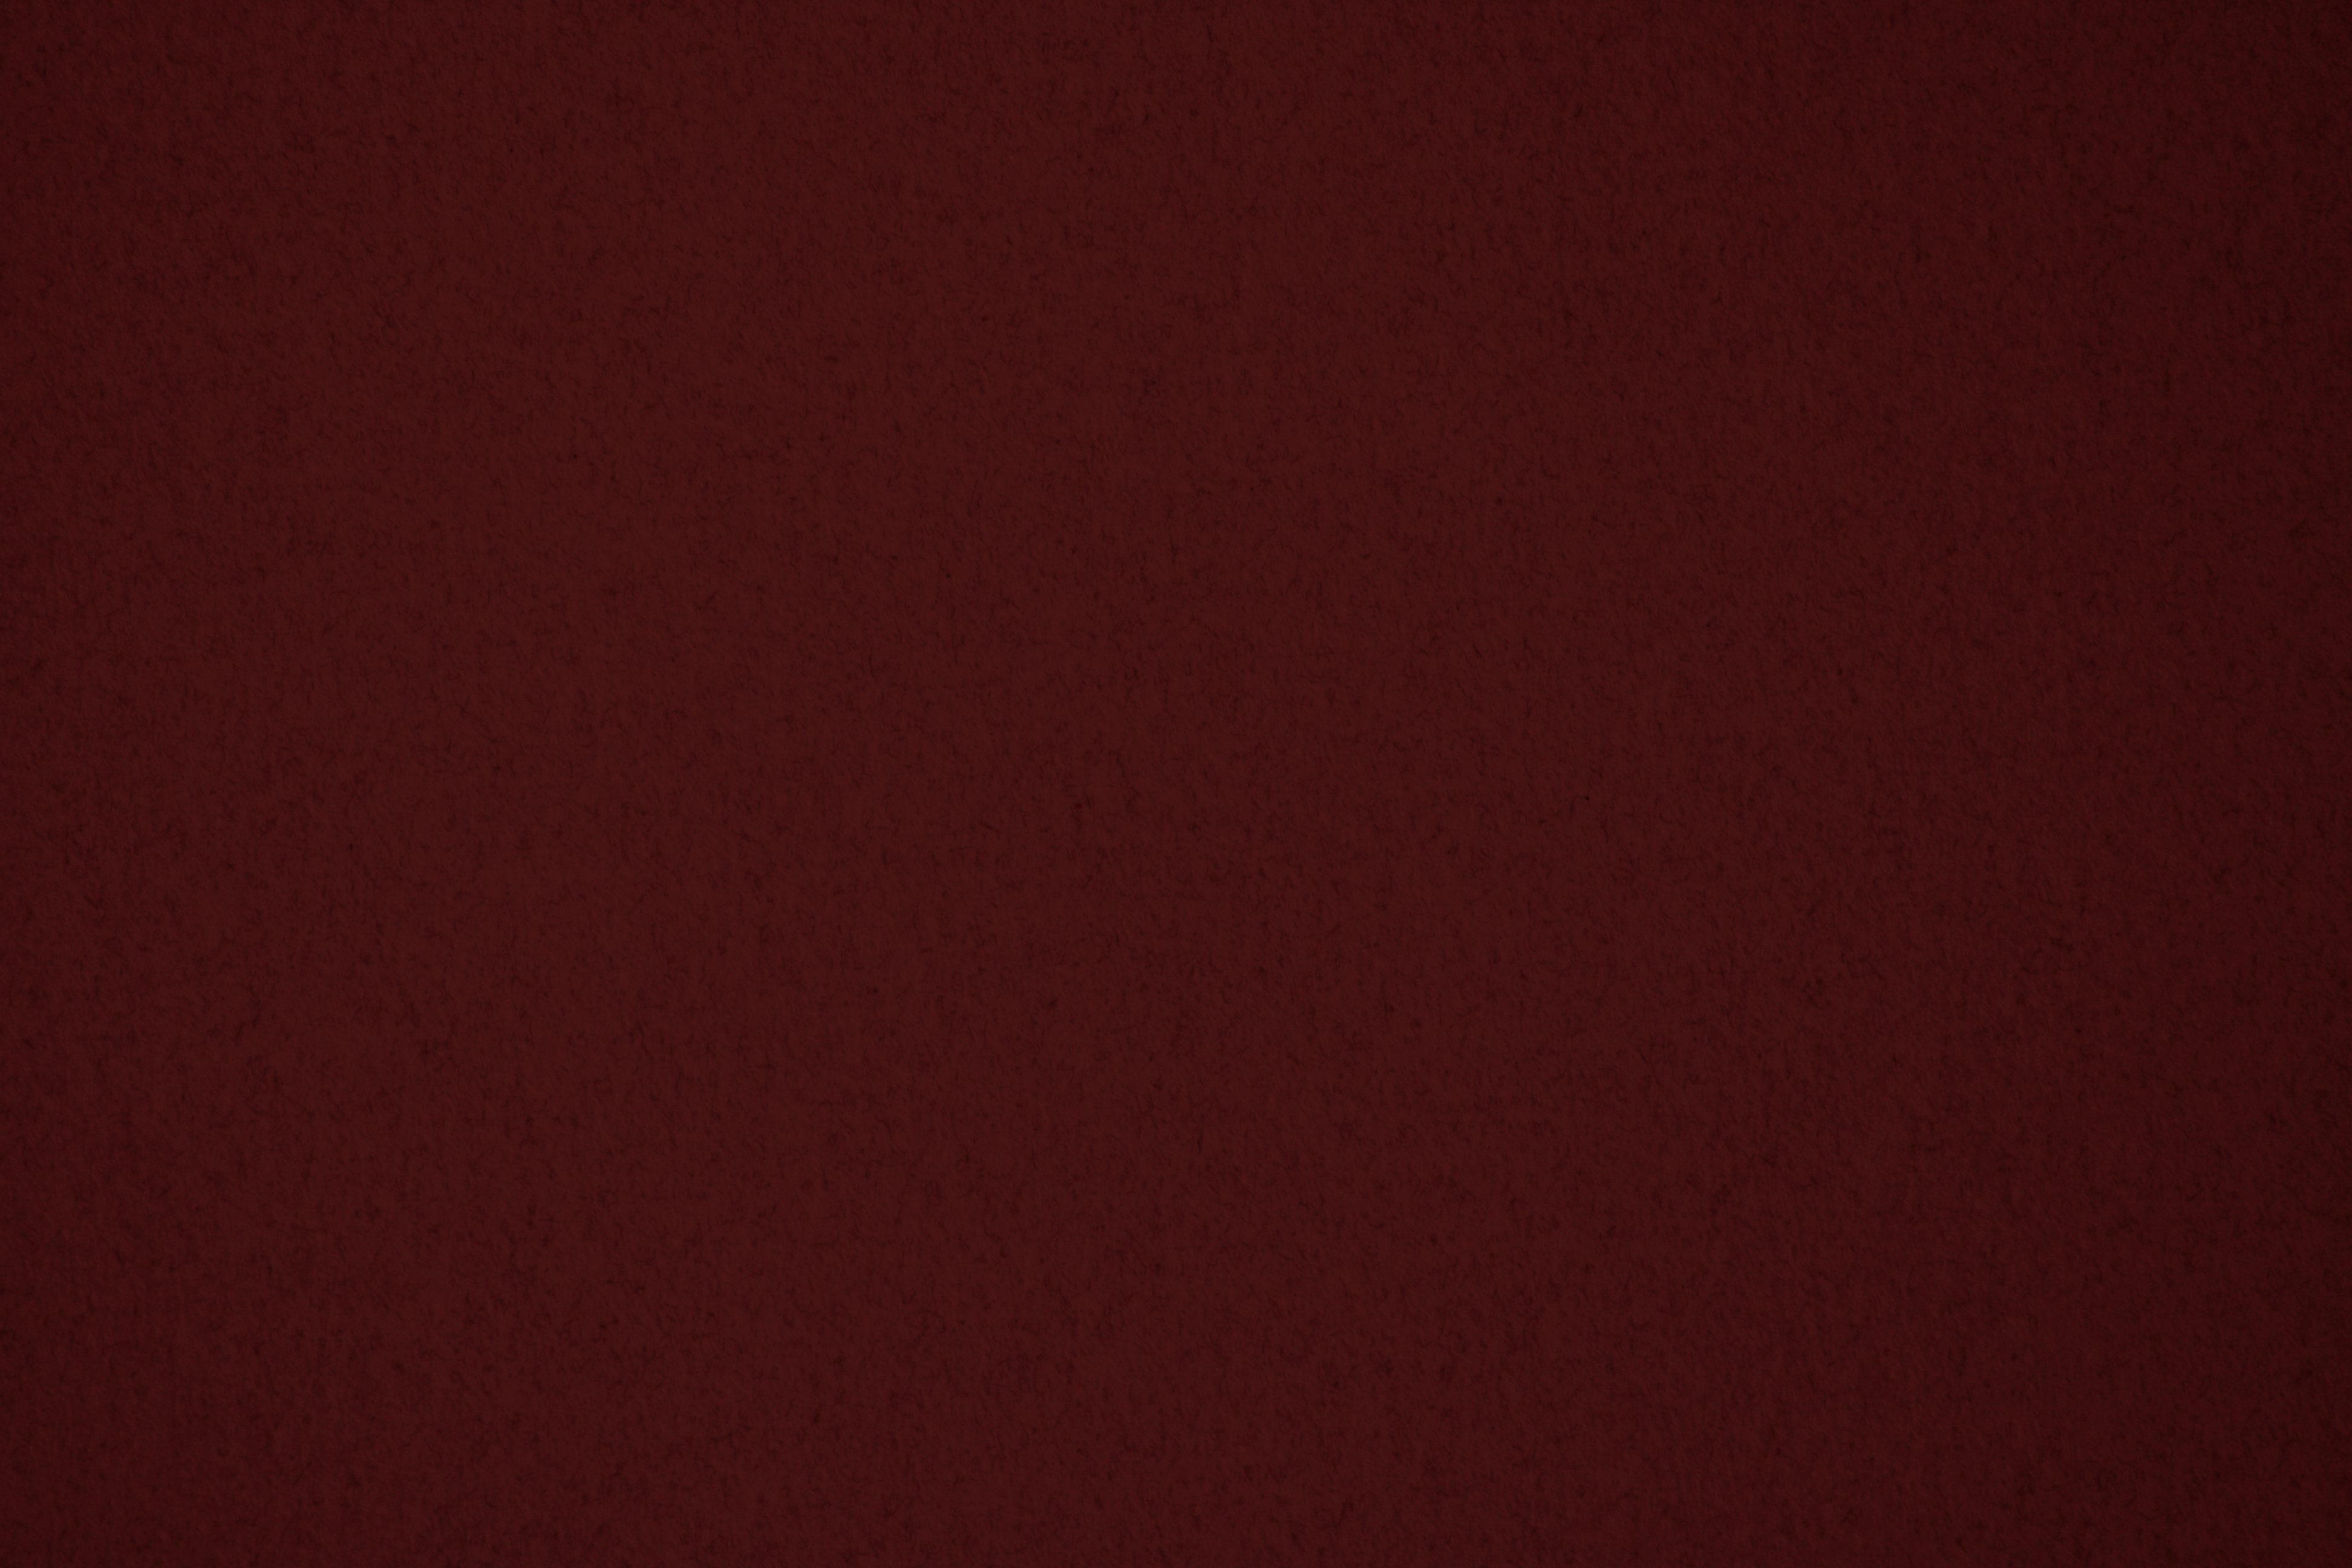 Maroon And Black Abstract Background Maroon Color Paper